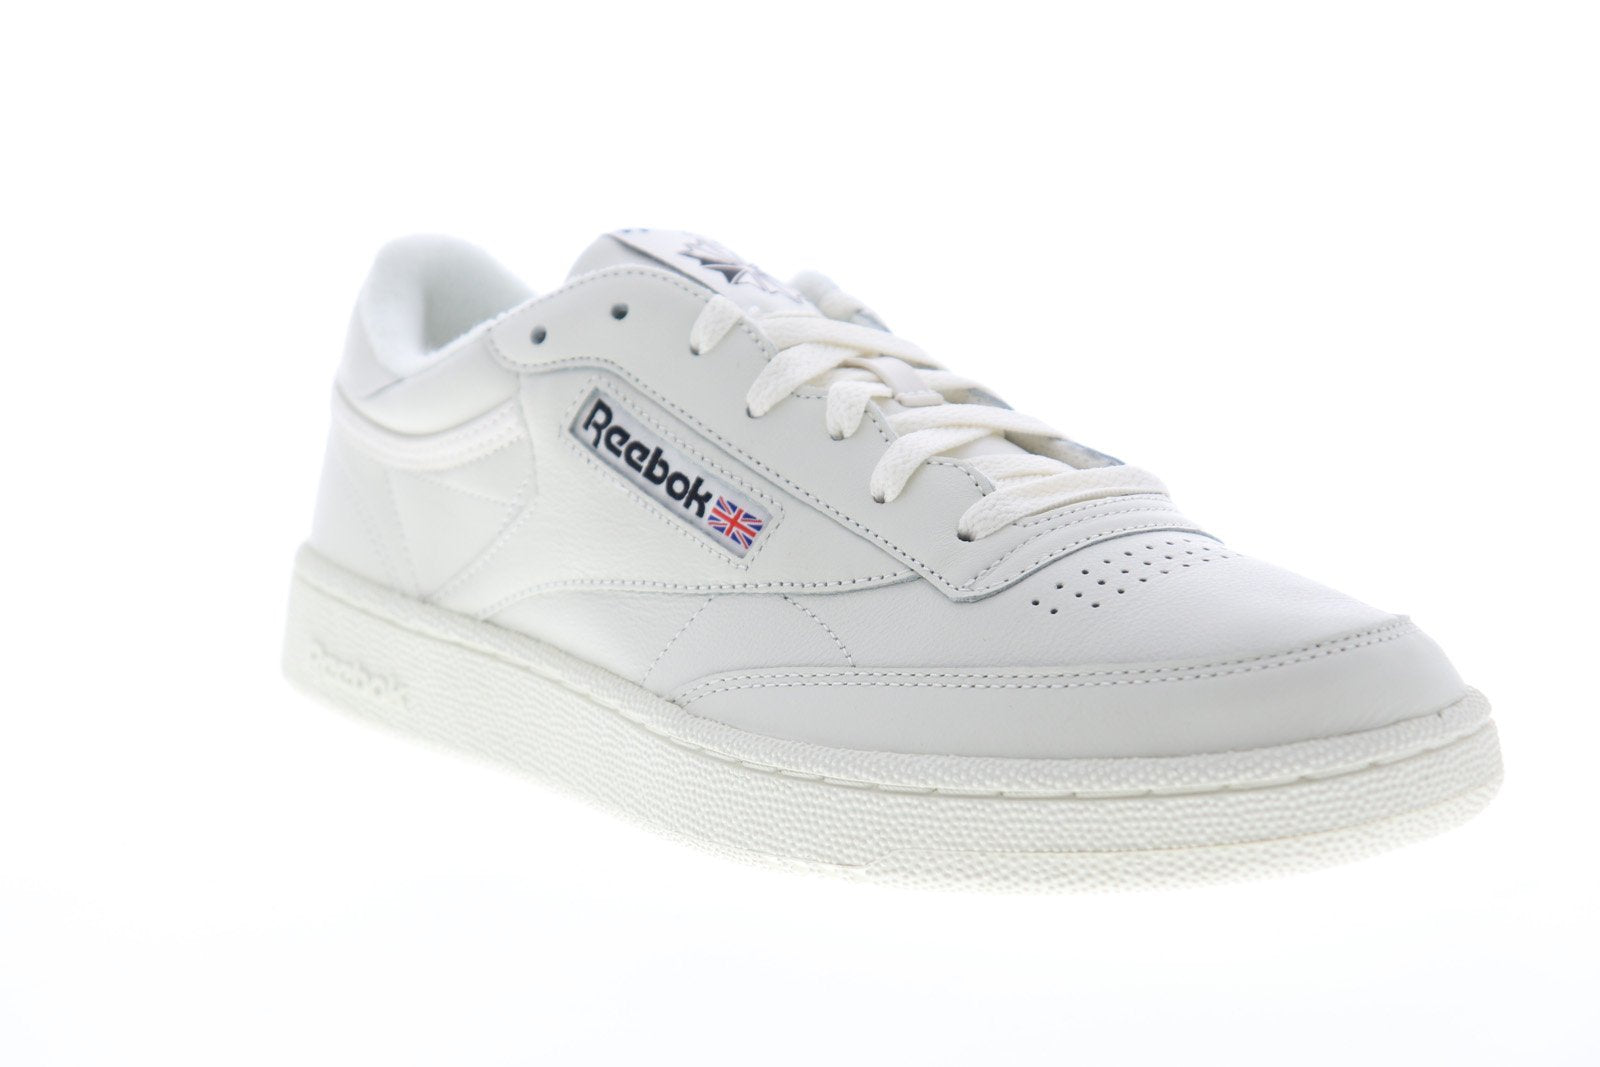 Reebok Club C 85 CN3924 Mens White Leather Lace Up Lifestyle Sneake - Ruze Shoes